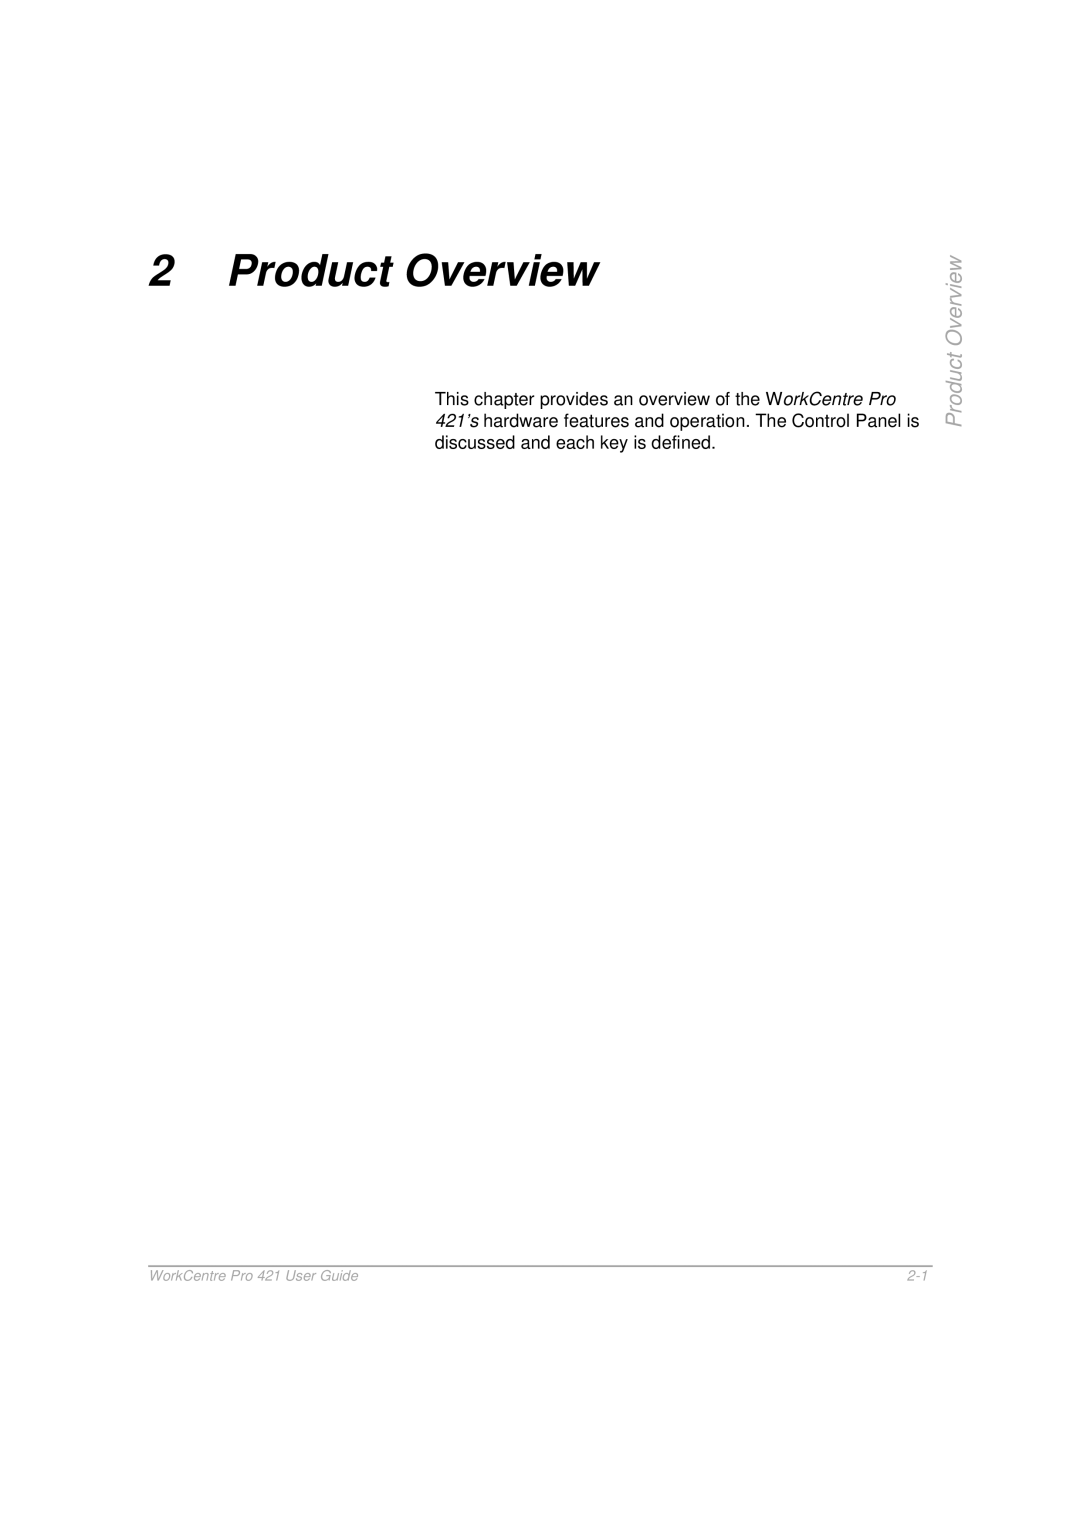 Xerox 421 manual Product Overview 